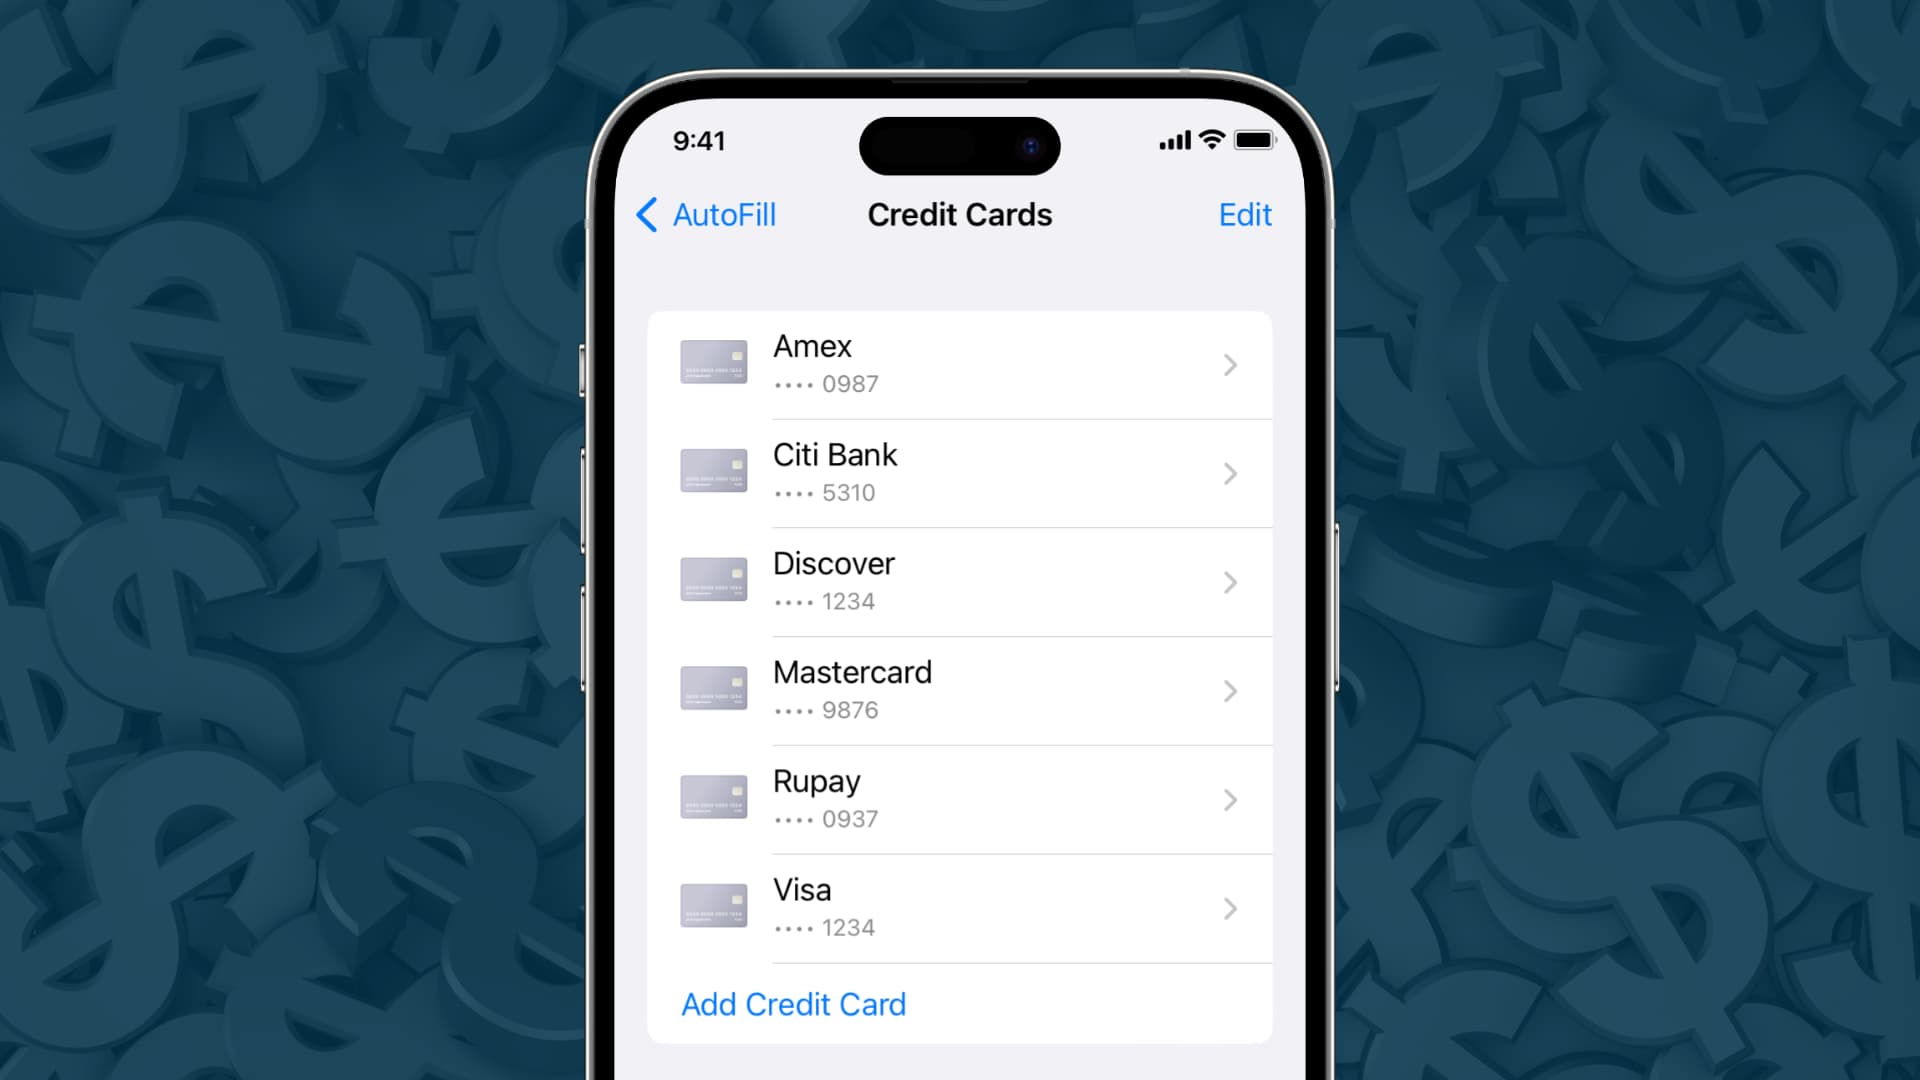 iPhone showing saved credit cards from Visa, Mastercard, Discover, Amex, Rupay, and Citi bank